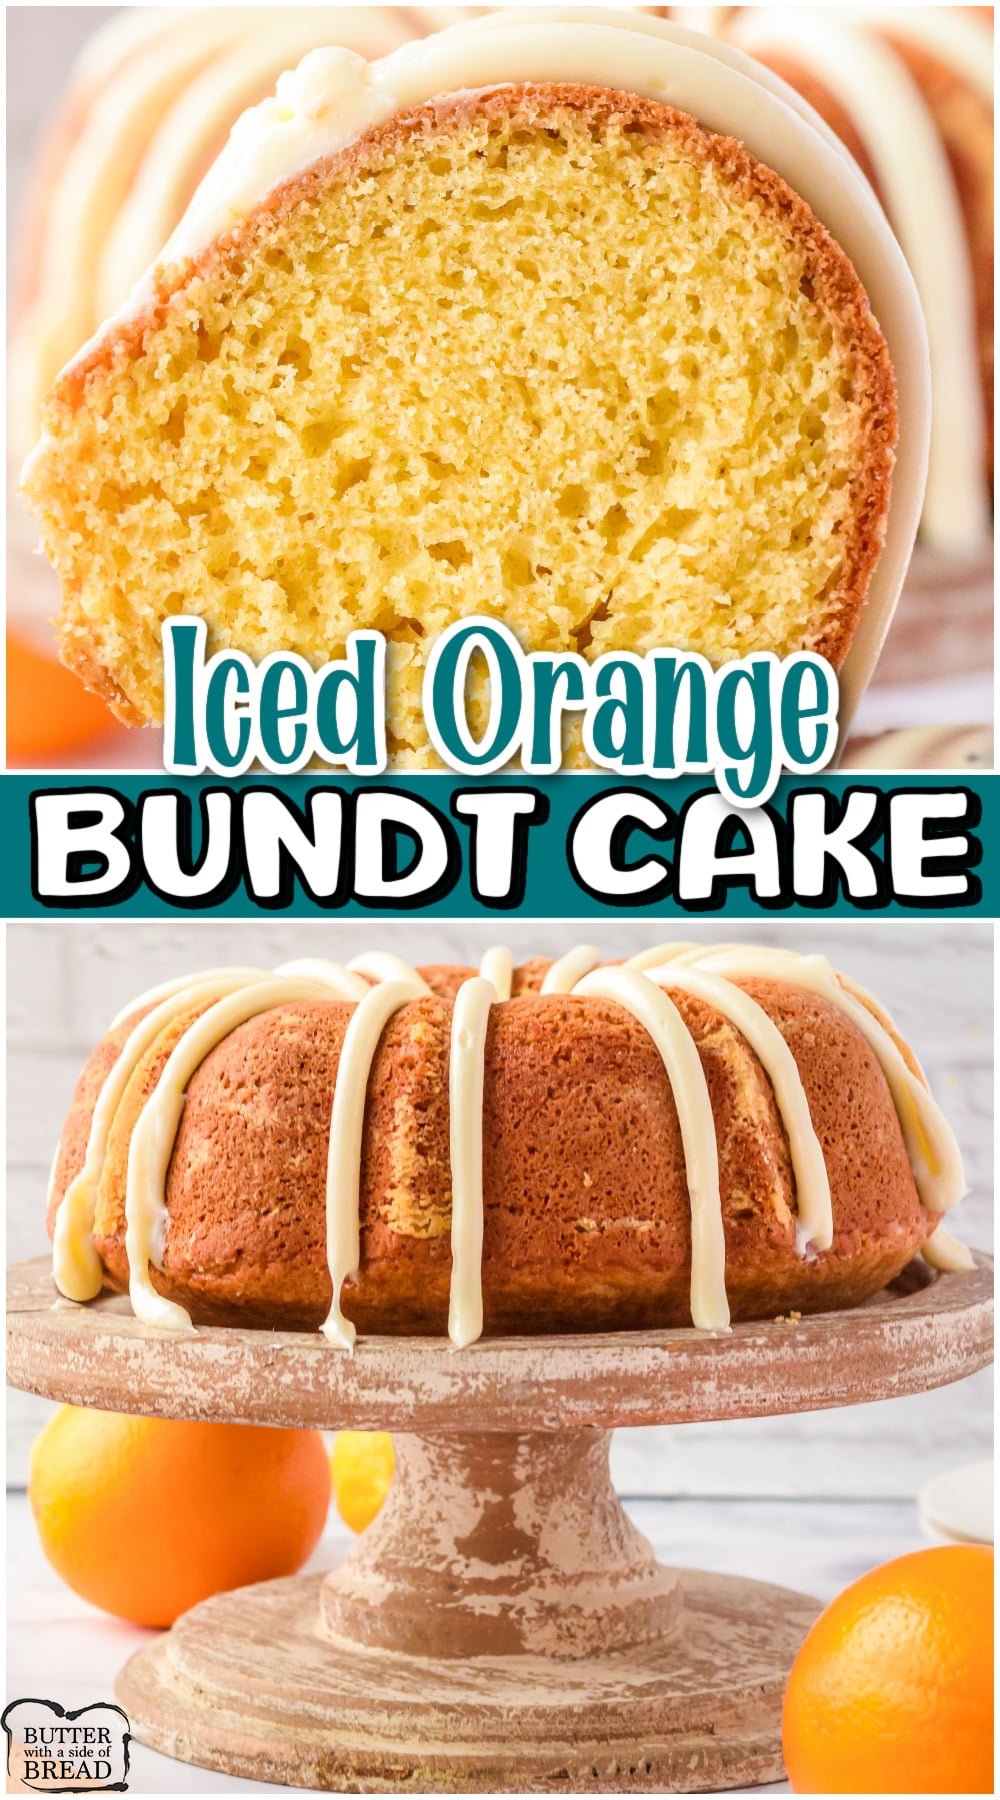 Orange Bundt Cake with Cream Cheese frosting is made with fresh orange juice and lemons, then topped with a rich cream cheese frosting! Fantastic homemade Bundt Cake recipe with delightful citrus flavors.